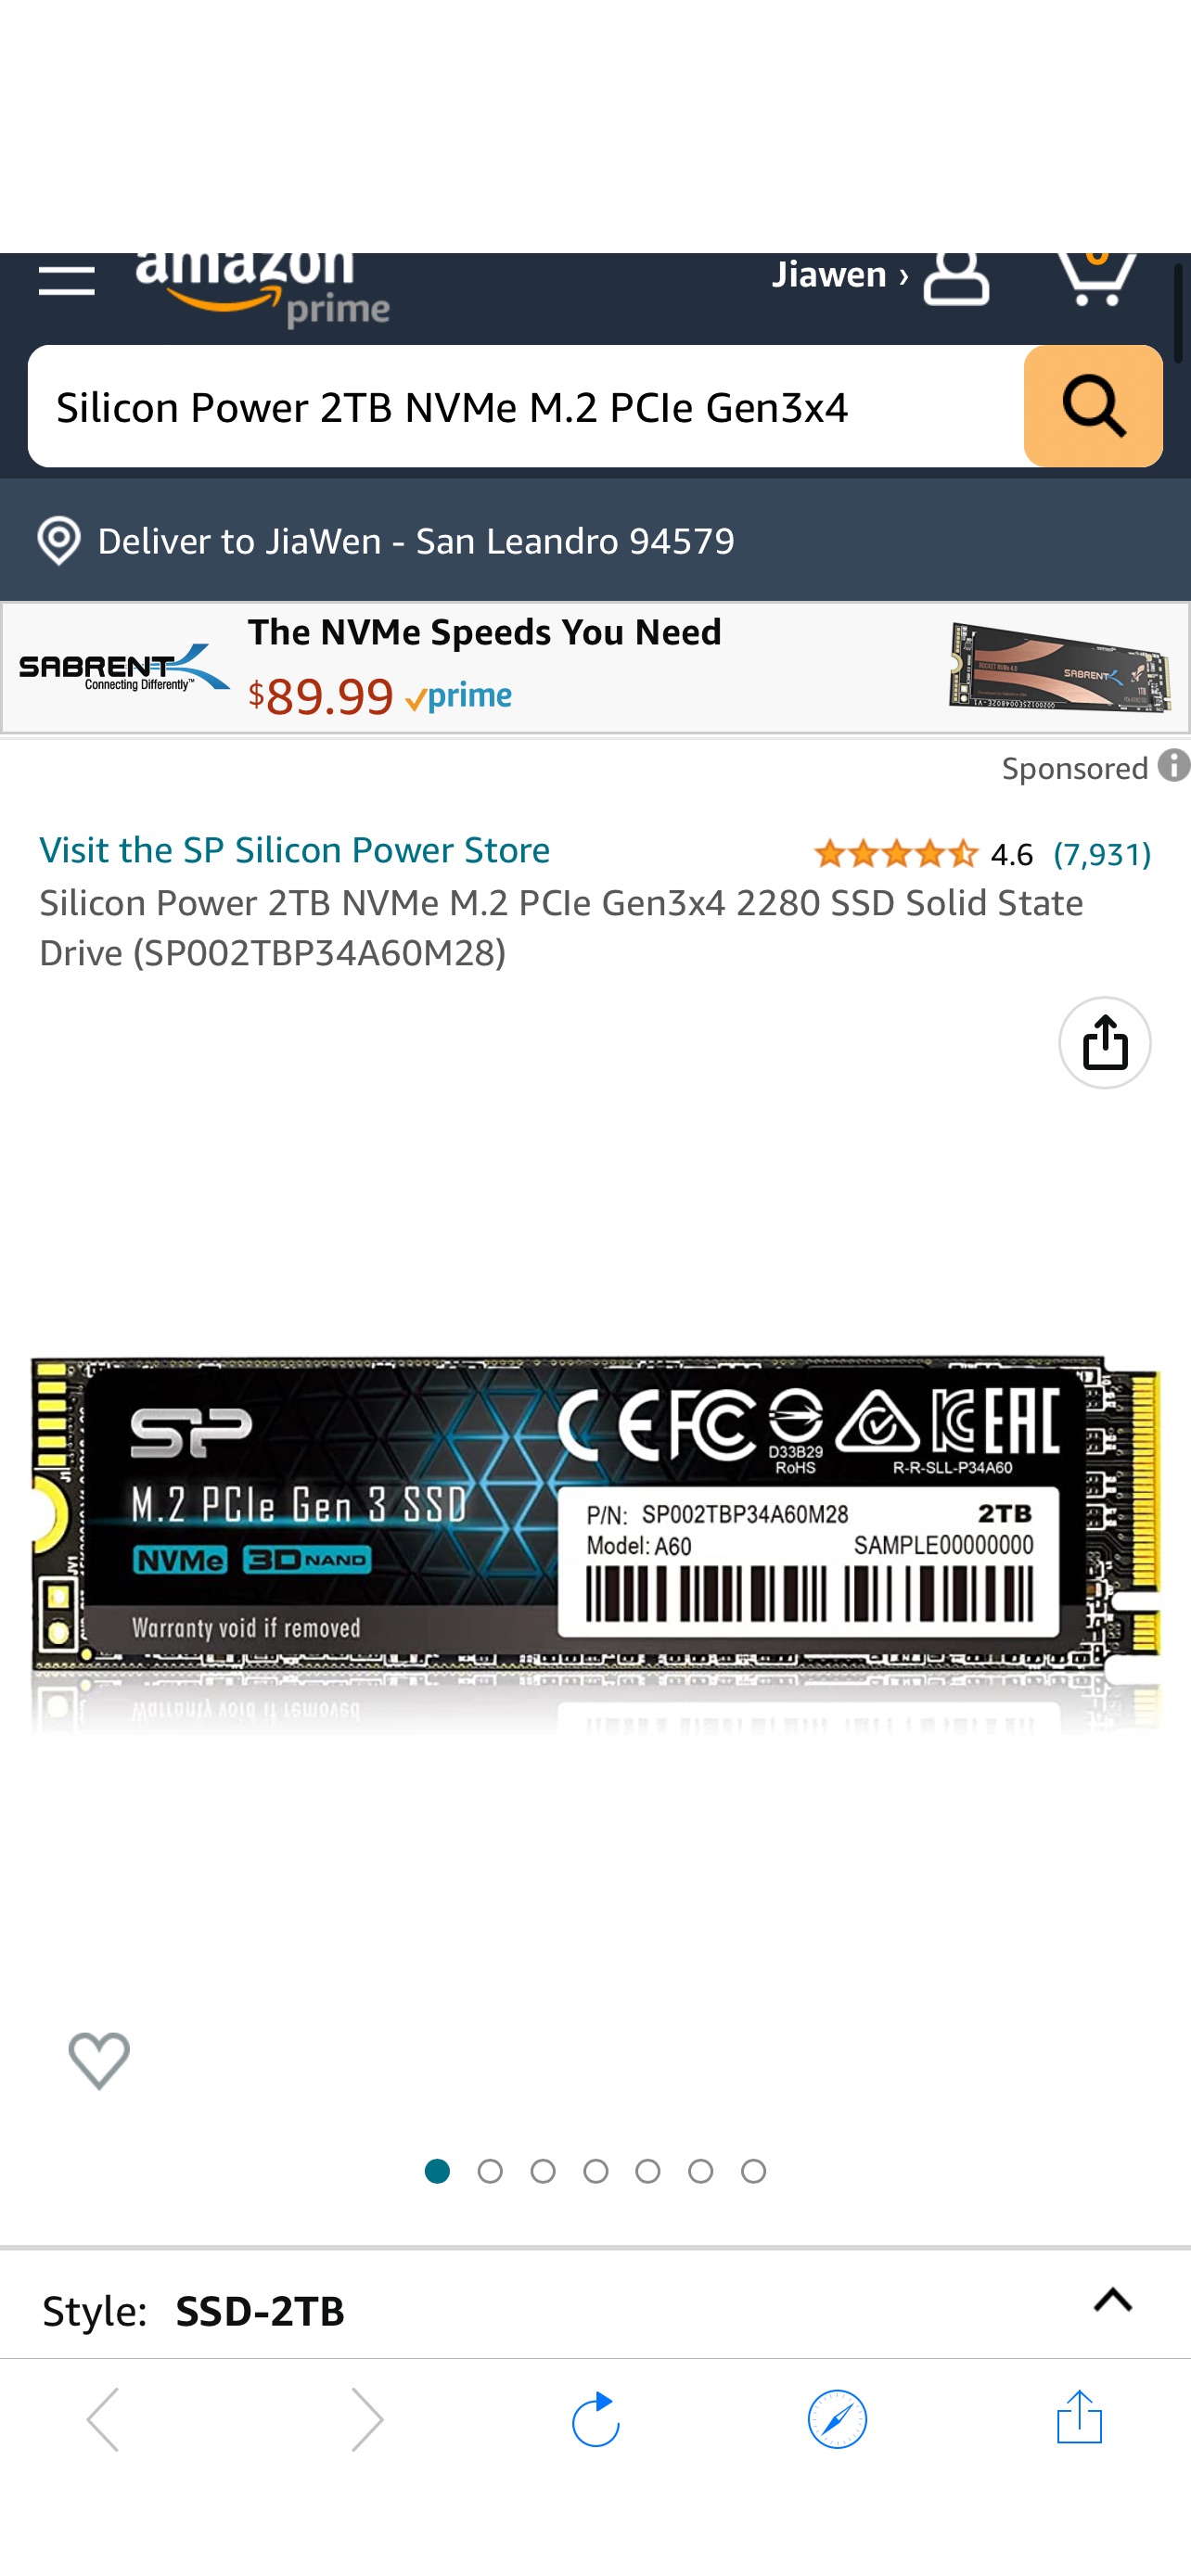 Amazon.com: Silicon Power 2TB NVMe M.2 PCIe Gen3x4 2280 SSD Solid State Drive (SP002TBP34A60M28) : Electronics